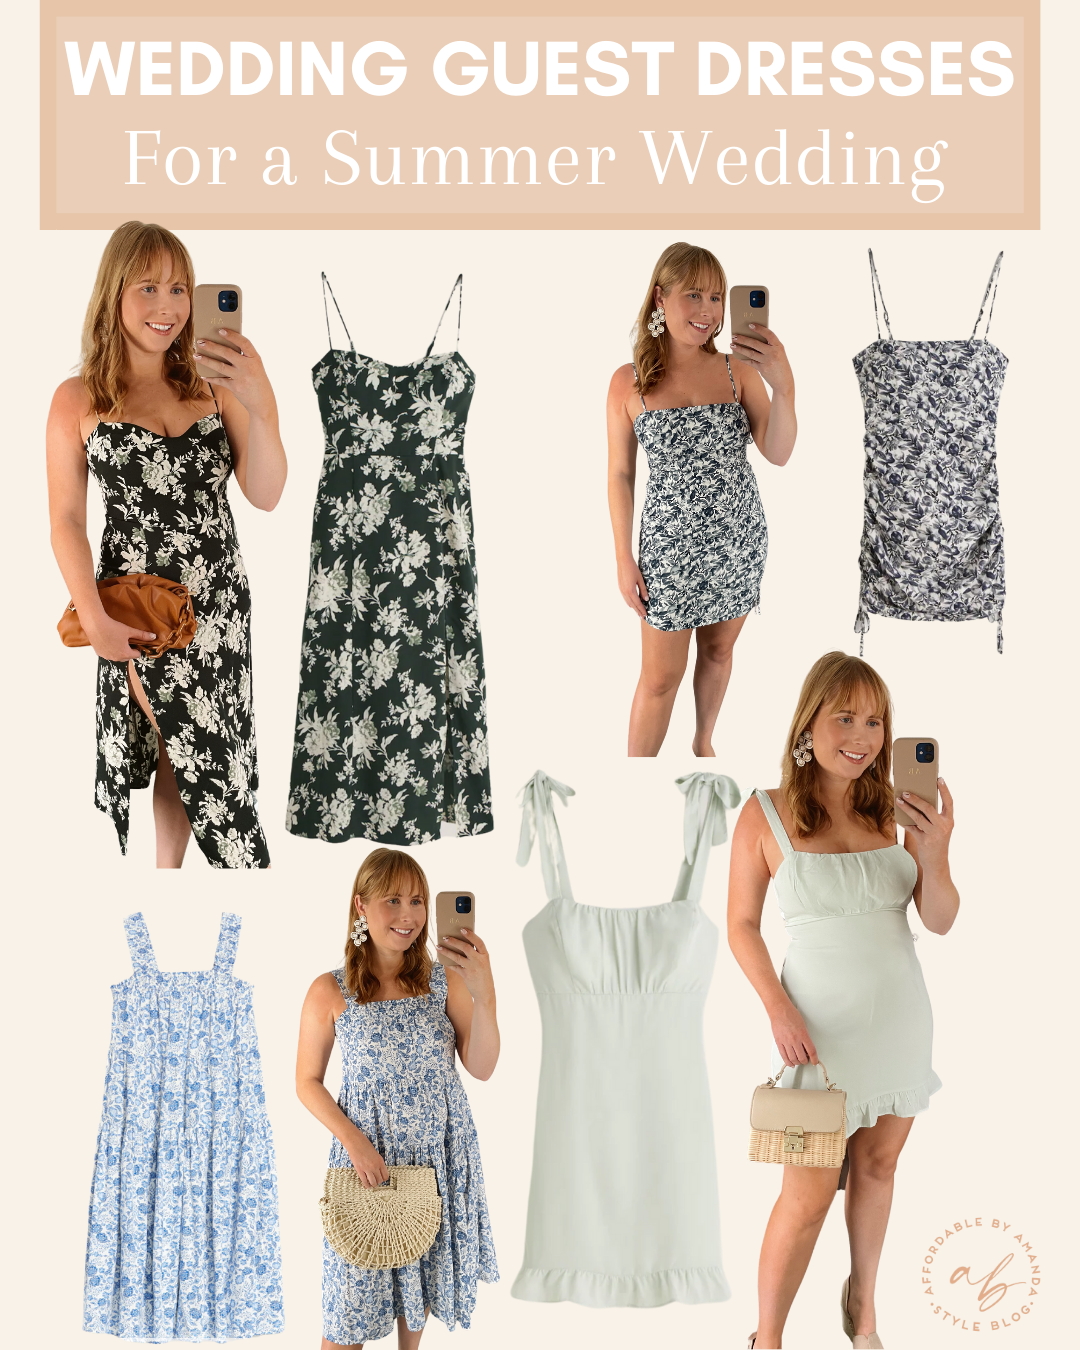 The Best Wedding Guest Dresses for Summer 2021 | Affordable by Amanda